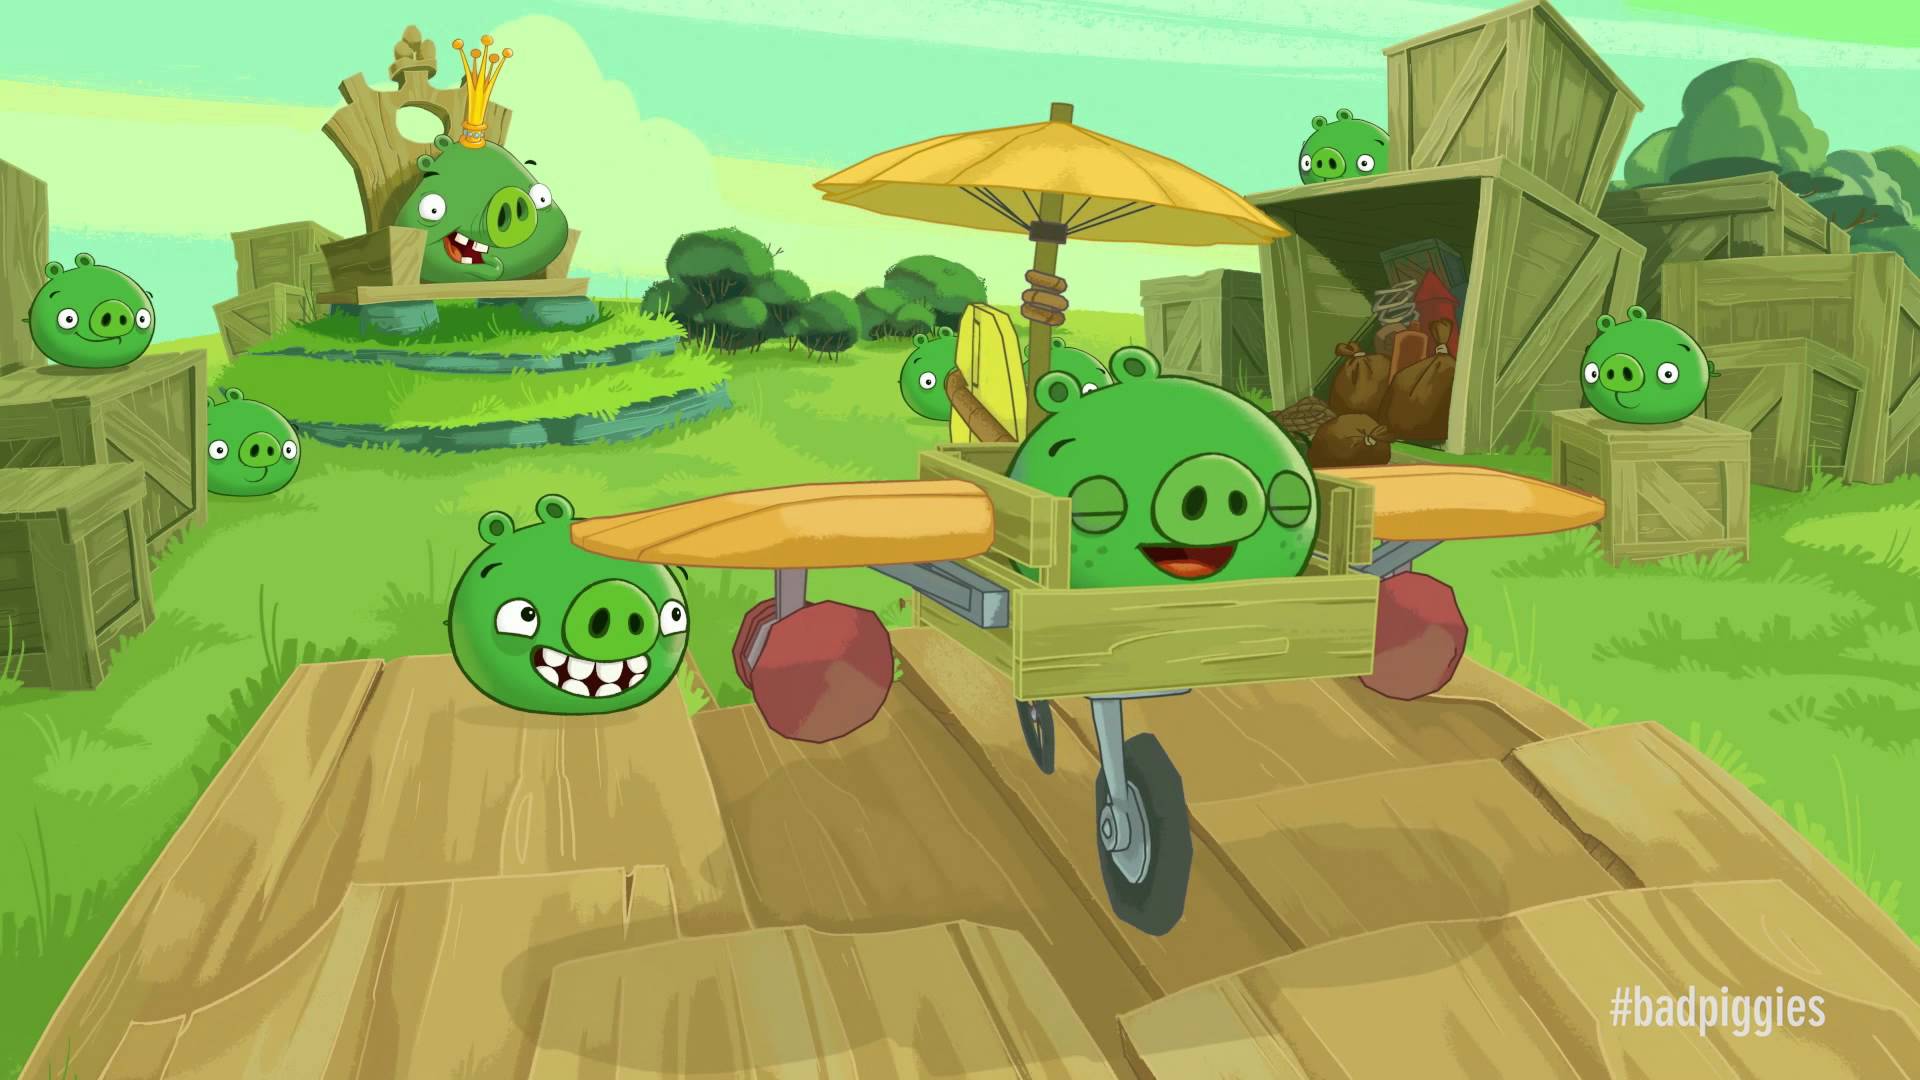 Bad Piggies Pics, Video Game Collection